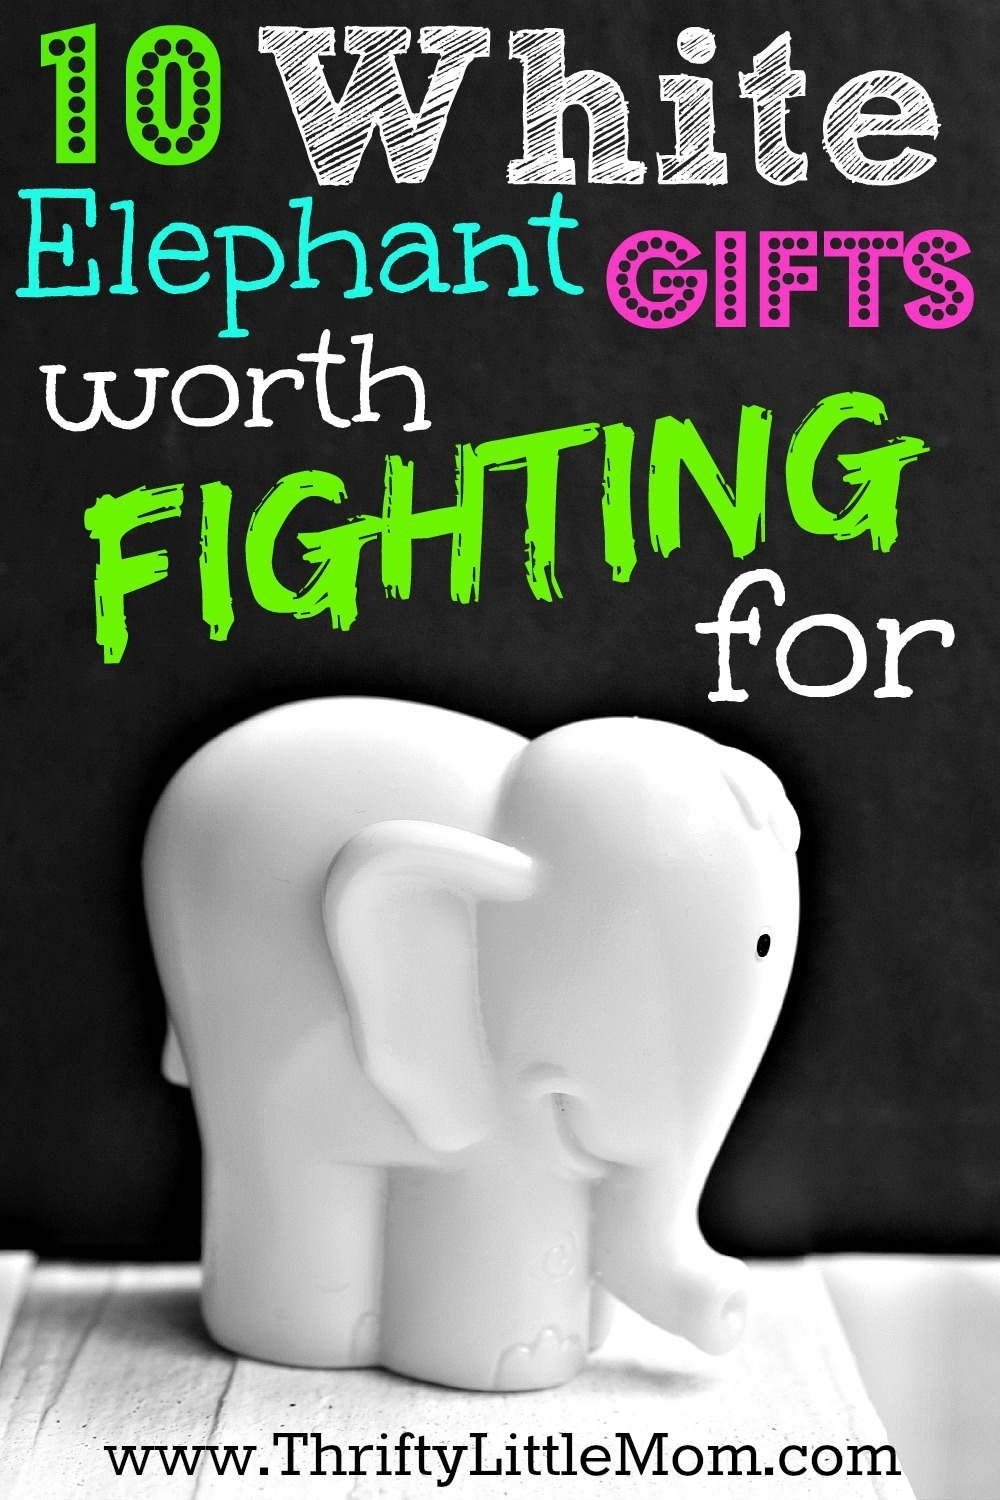 10 Awesome 10 Fun Christmas Gift Exchange Ideas white elephant gifts worth fighting for yankee swap ideas white 27 2022